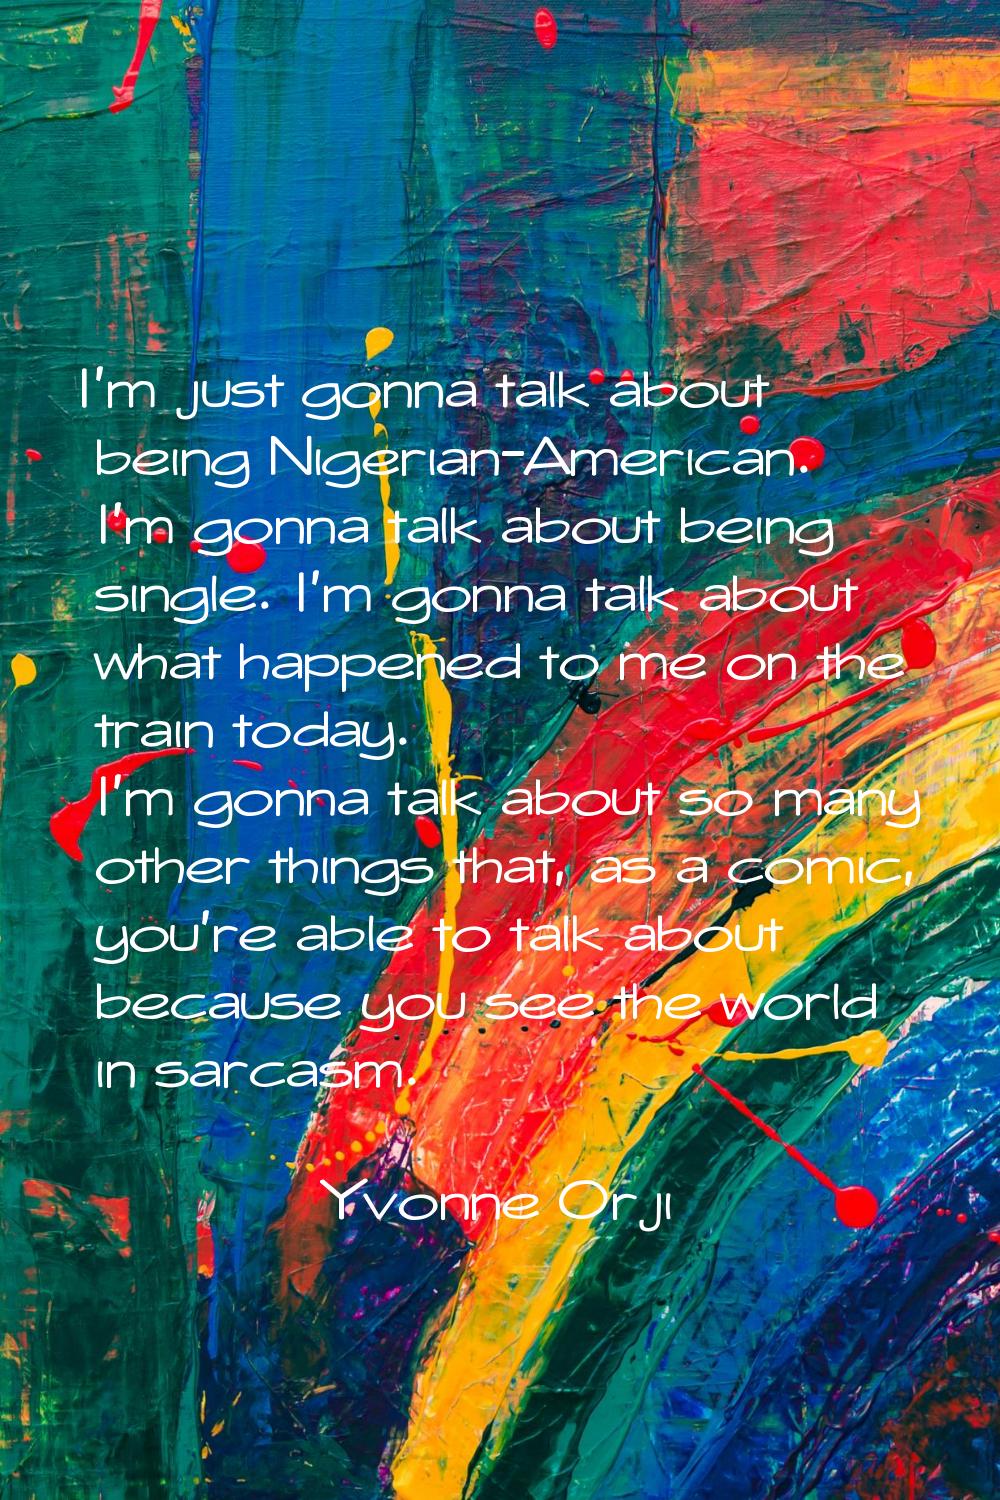 I'm just gonna talk about being Nigerian-American. I'm gonna talk about being single. I'm gonna tal